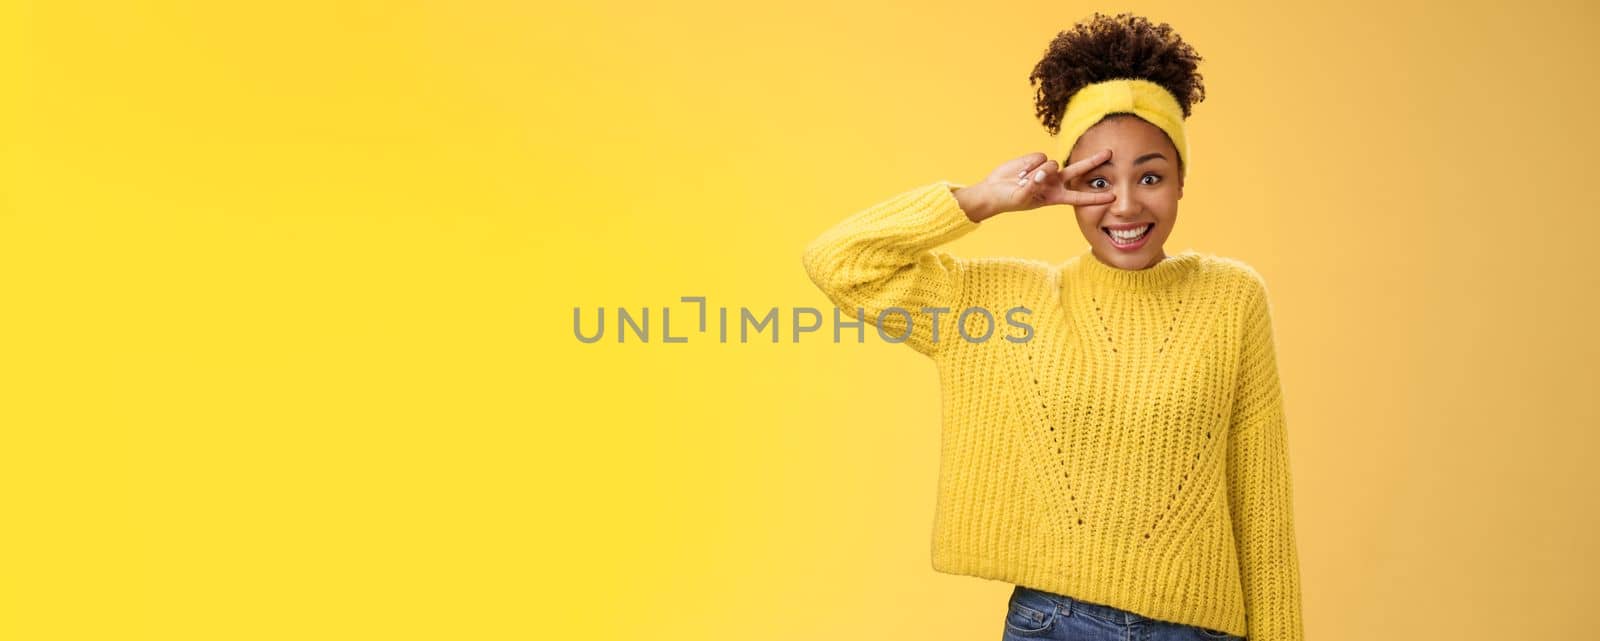 Silly insecure cute awkward young millennial girl blushing unconfident photographing smiling show peace victory sign near eye bad in posing, standing friendly yellow background. Copy space